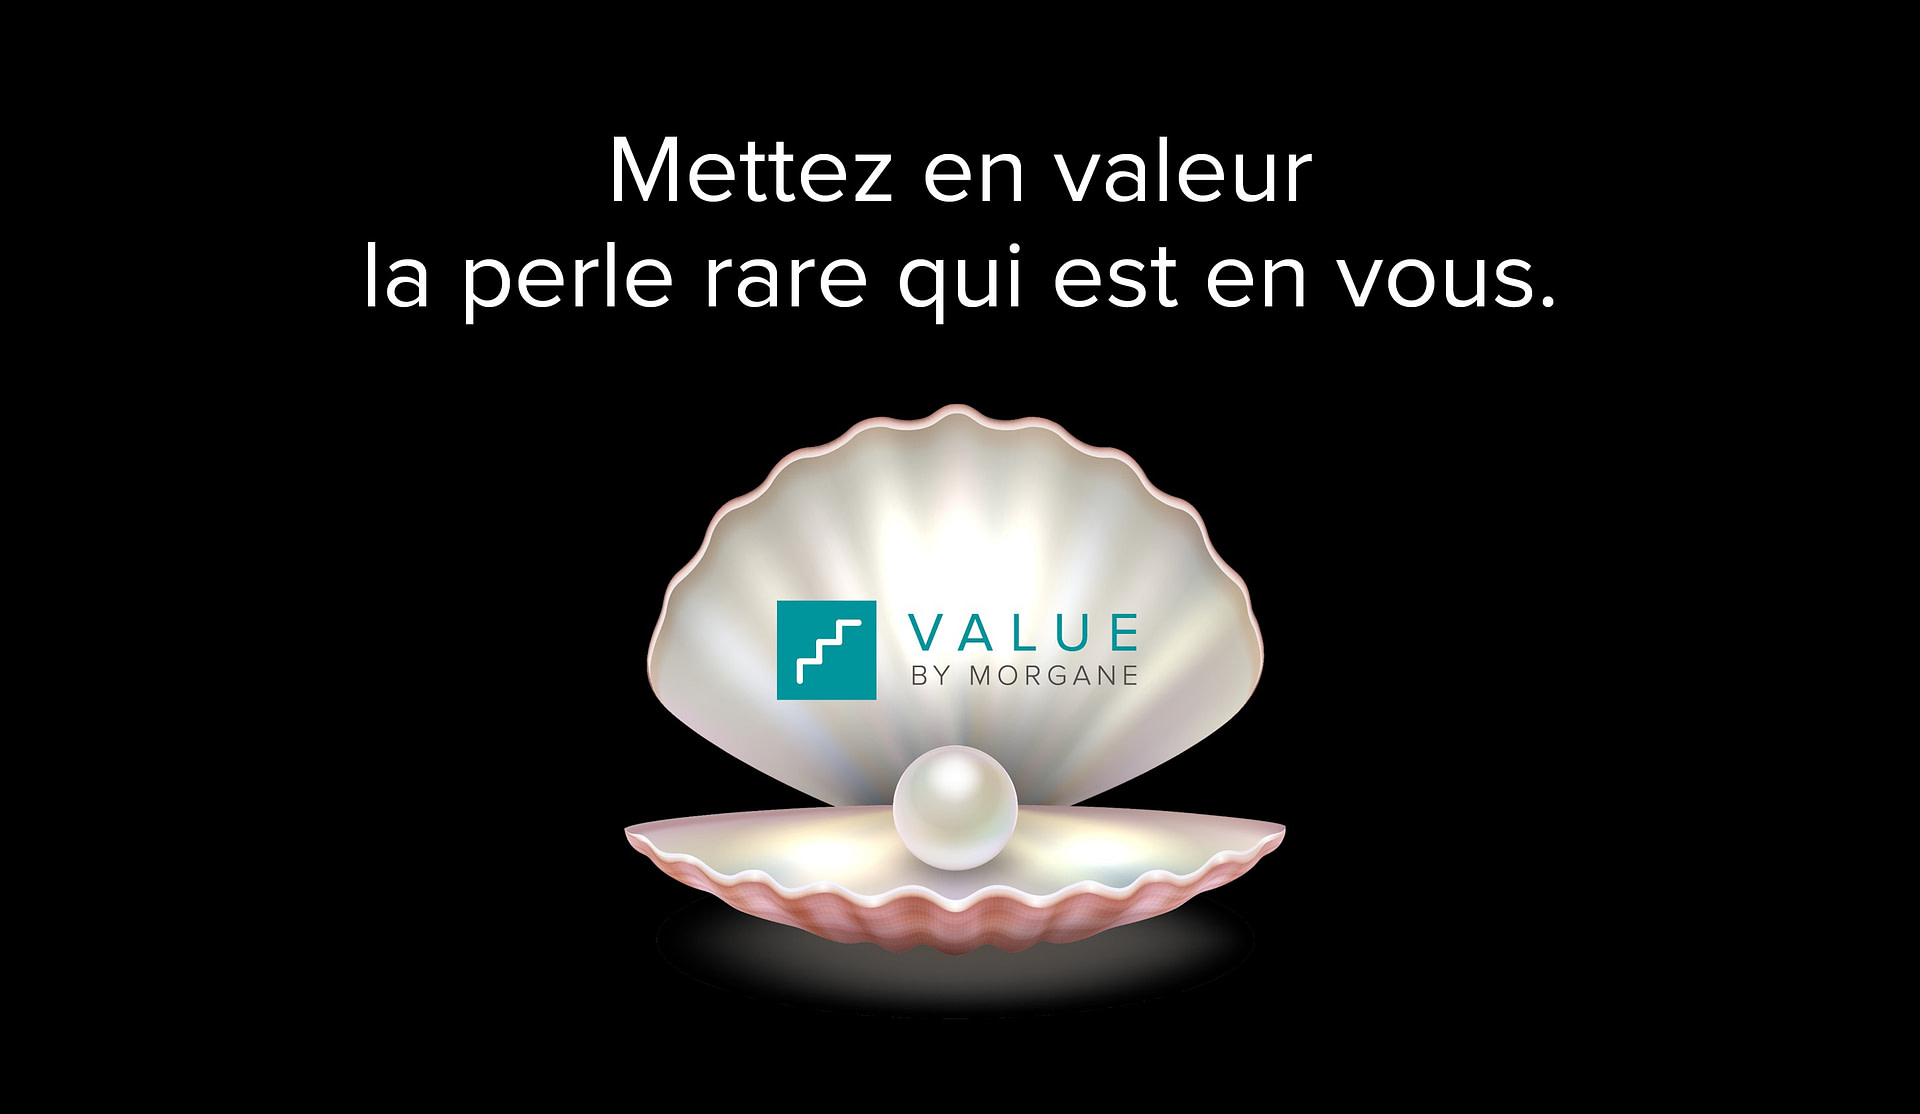 plate-ou-gazeuse-creations-value-by-morgane-ppt-perle-fond-noir@2x